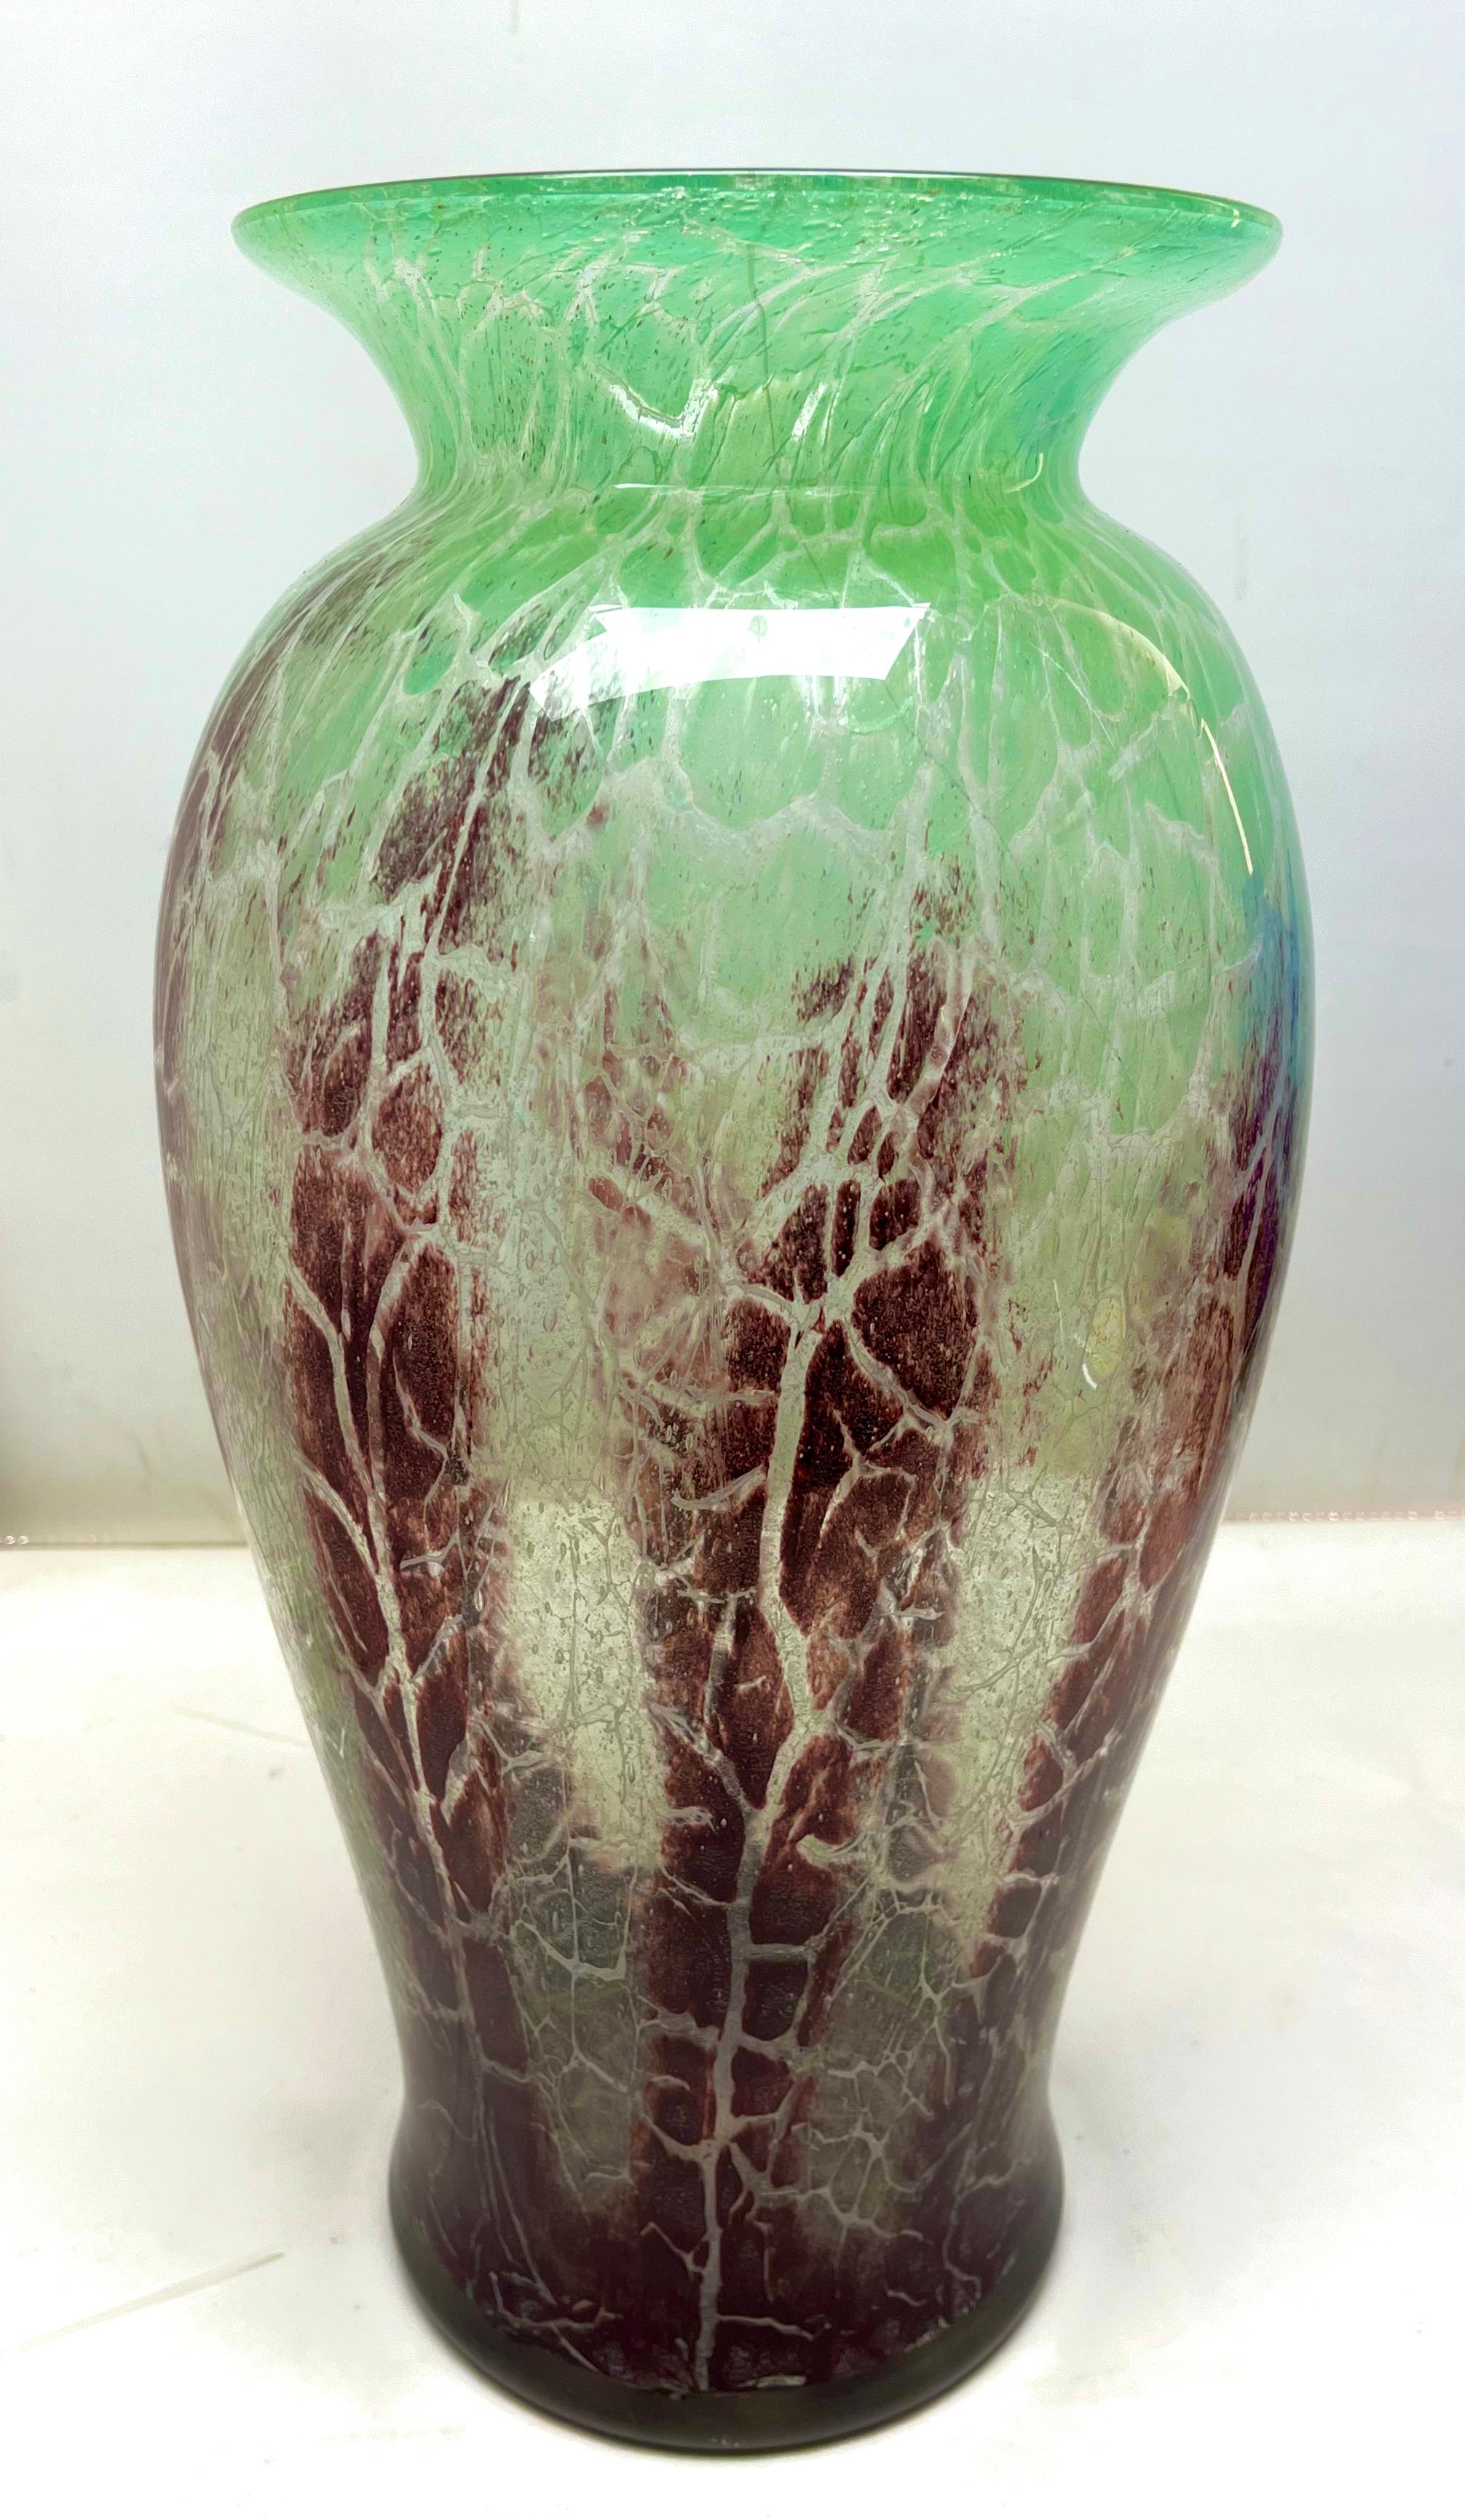 Hand-Crafted 'Ikora' Large Art Glass Vase, Produced by WMF in Germany, 1930s by Karl Wiedmann